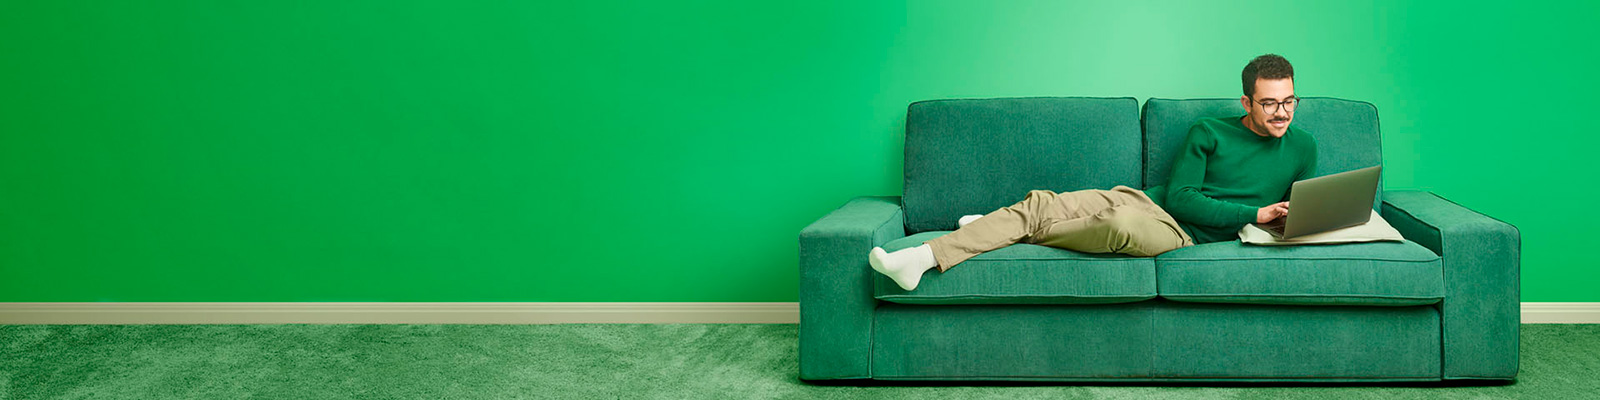 young man on green couch with laptop